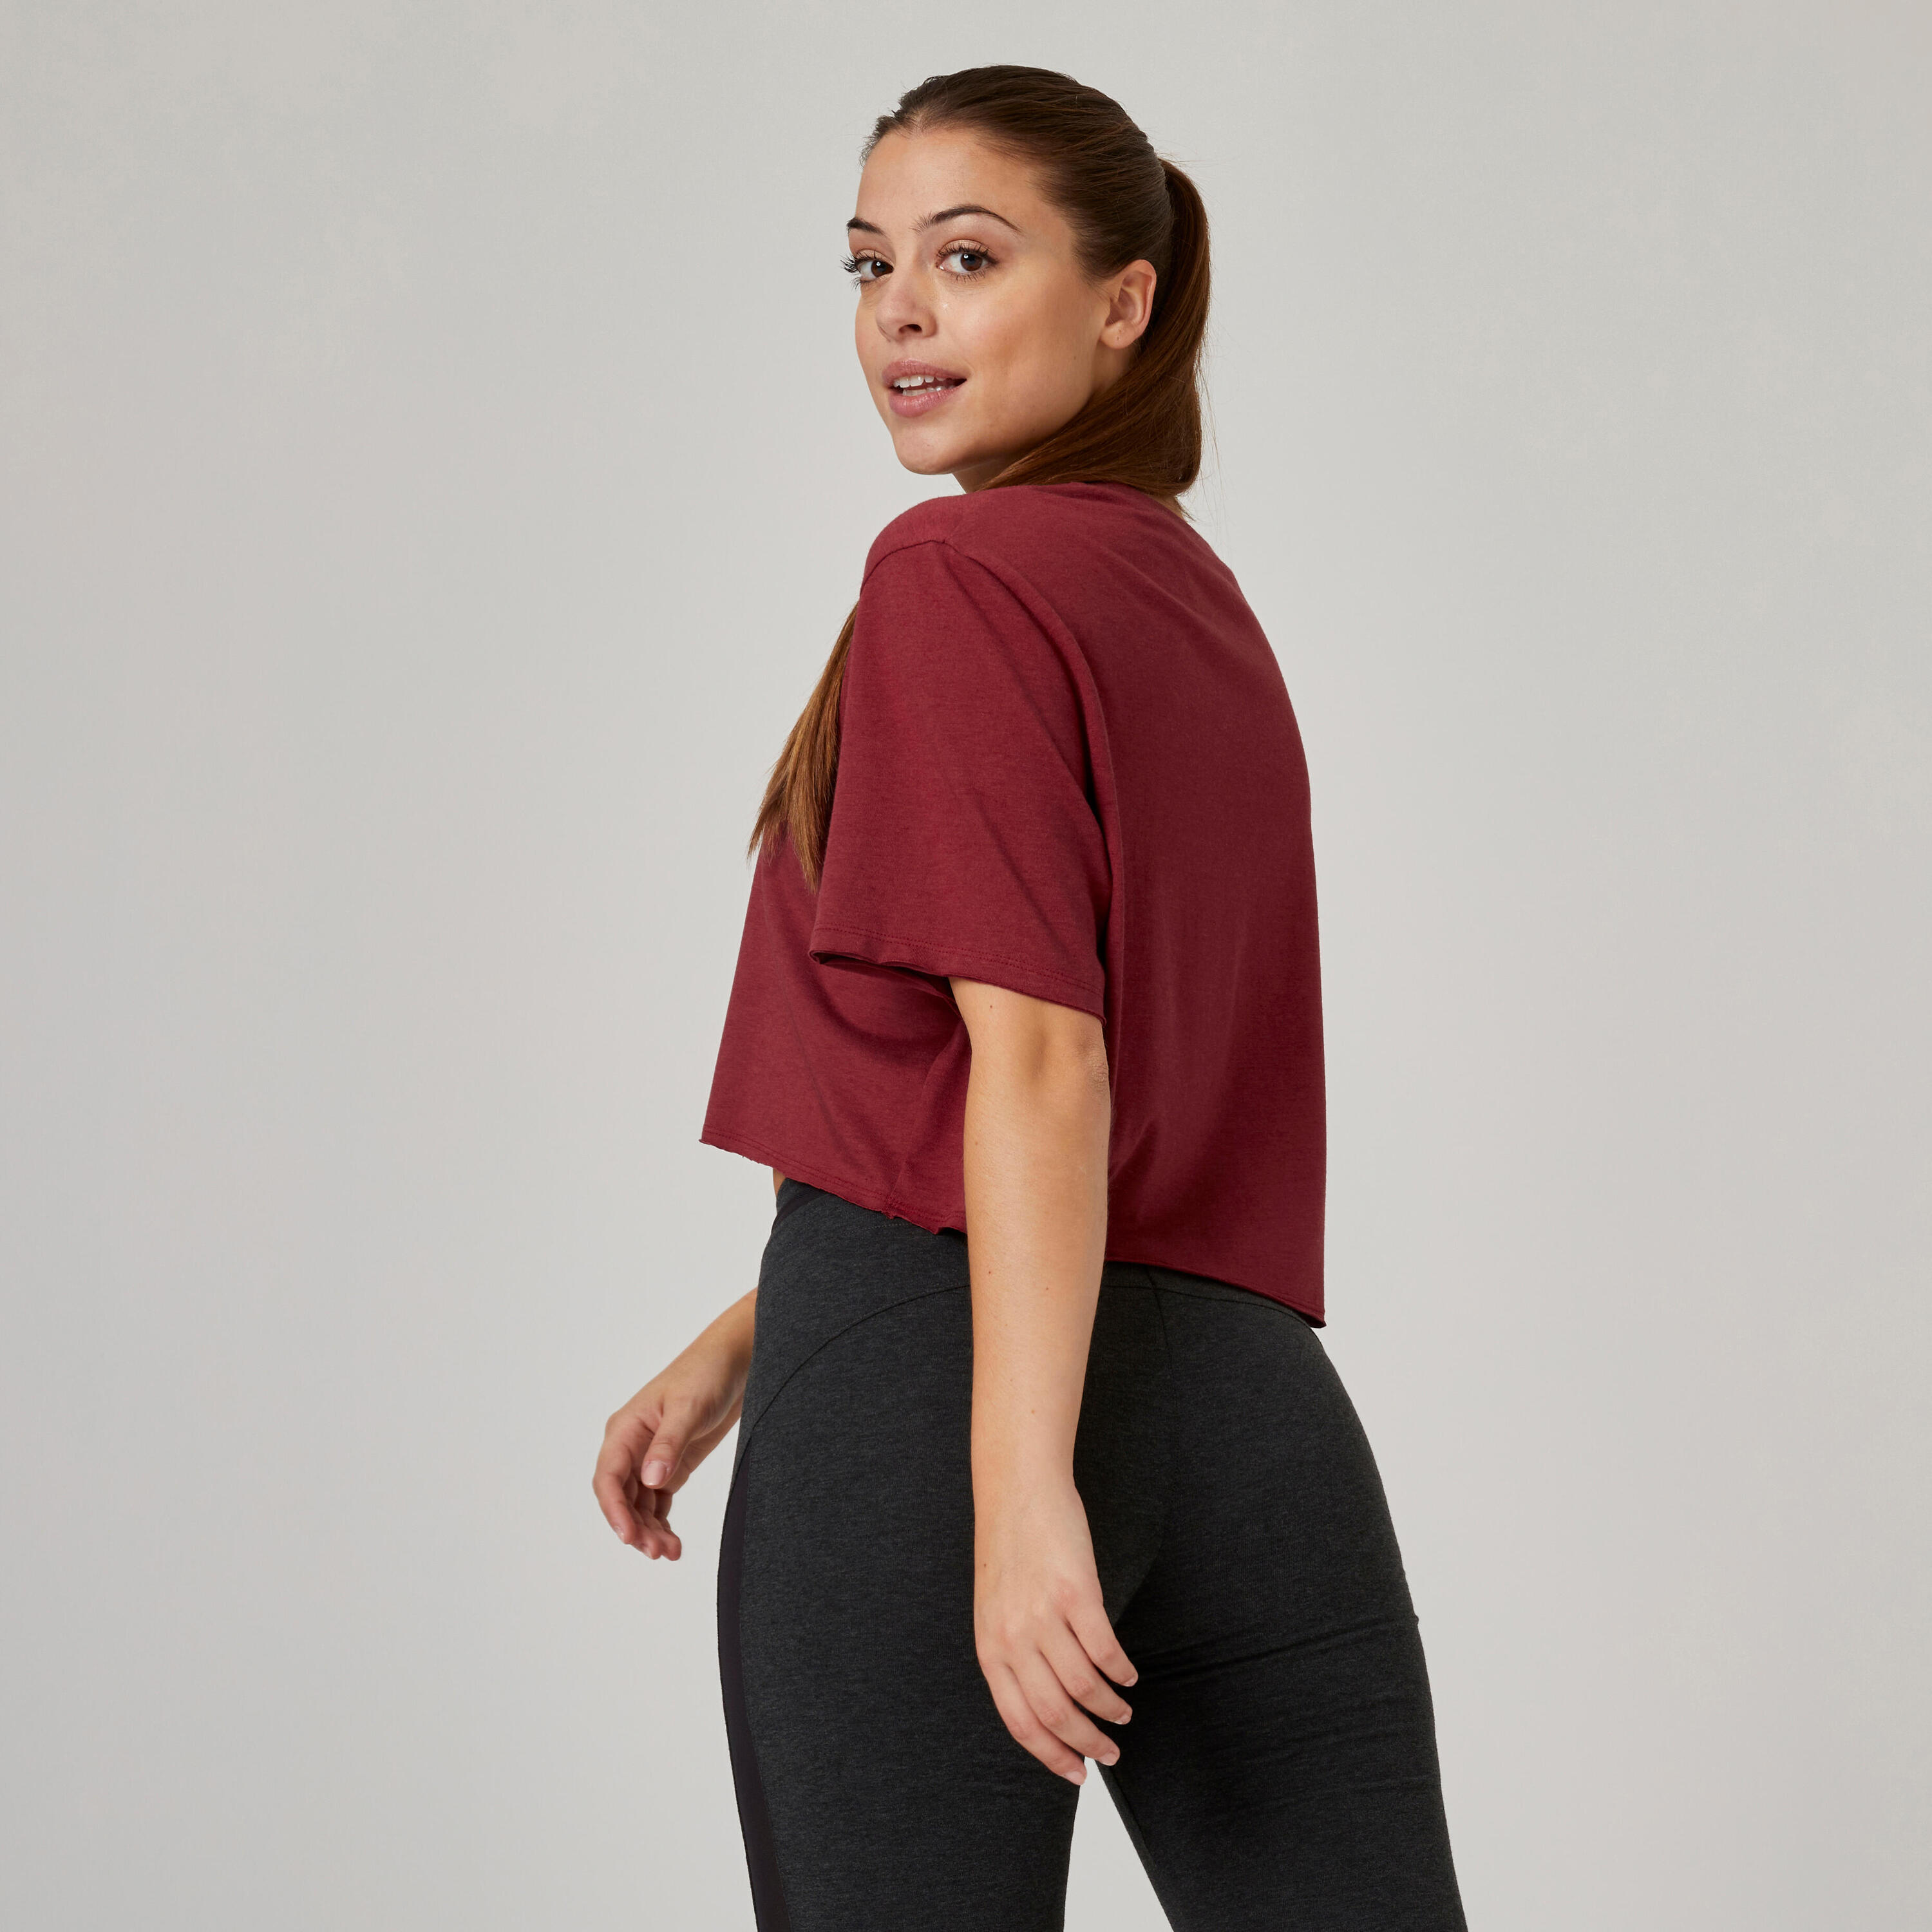 Women's Cropped Fitness T-Shirt 520 - Beetroot Red 2/7